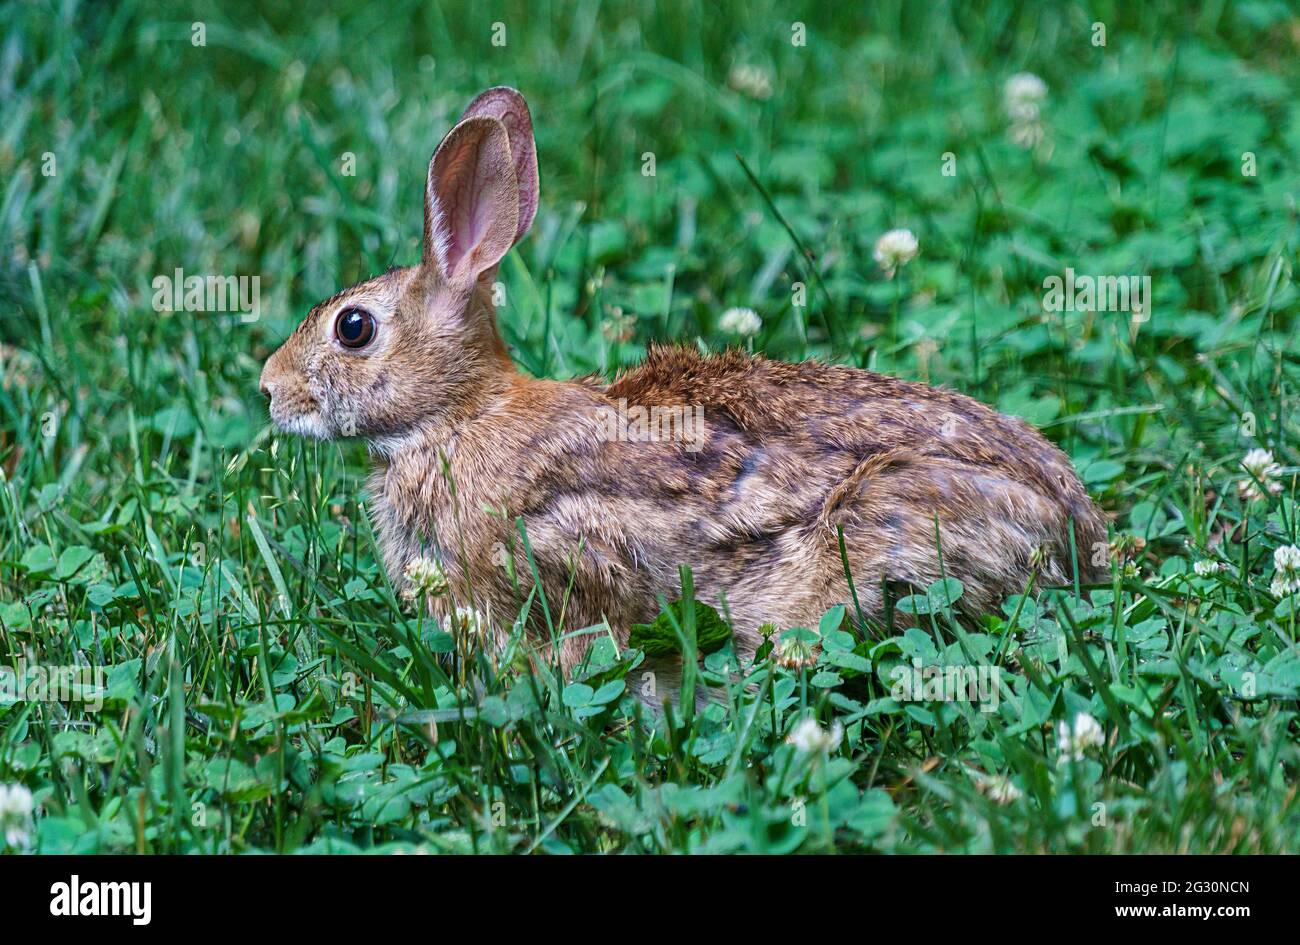 Alert brown rabbit crouching in a clover-filled meadow. Side view with ears pricked up. Stock Photo